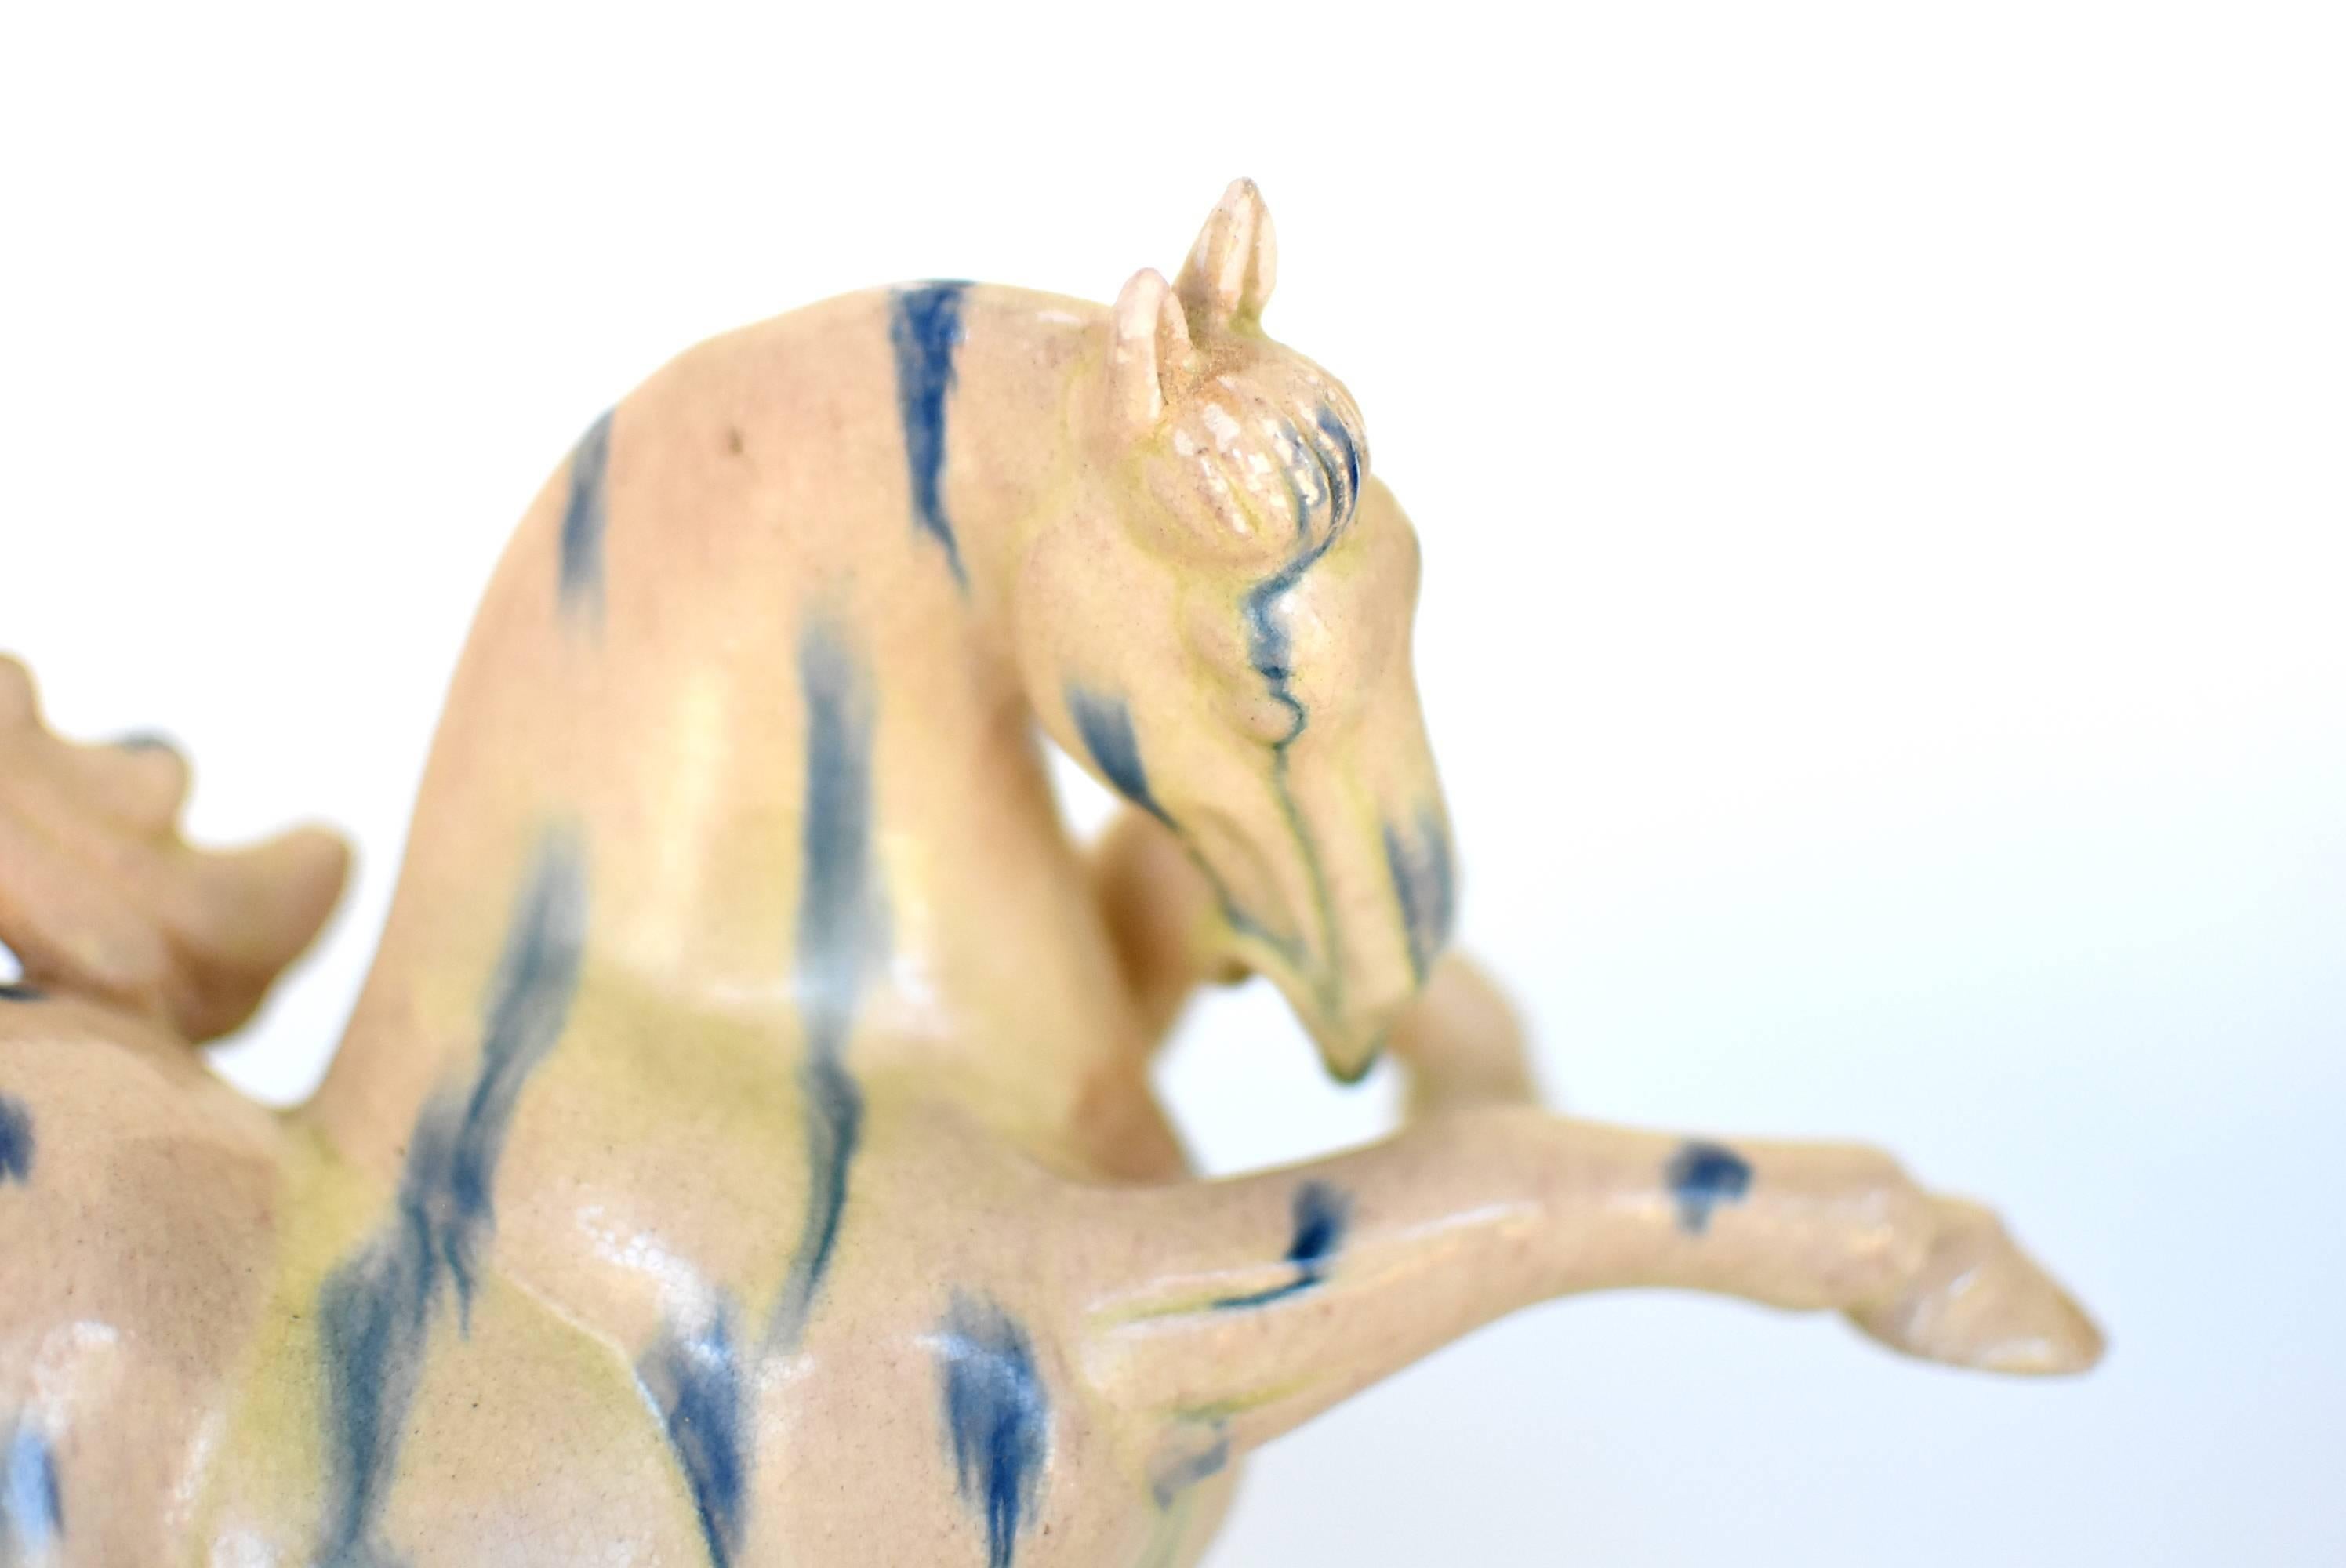 Set of 4 Large Pottery Horses, Chinese Terracotta with Blue Streaks 6